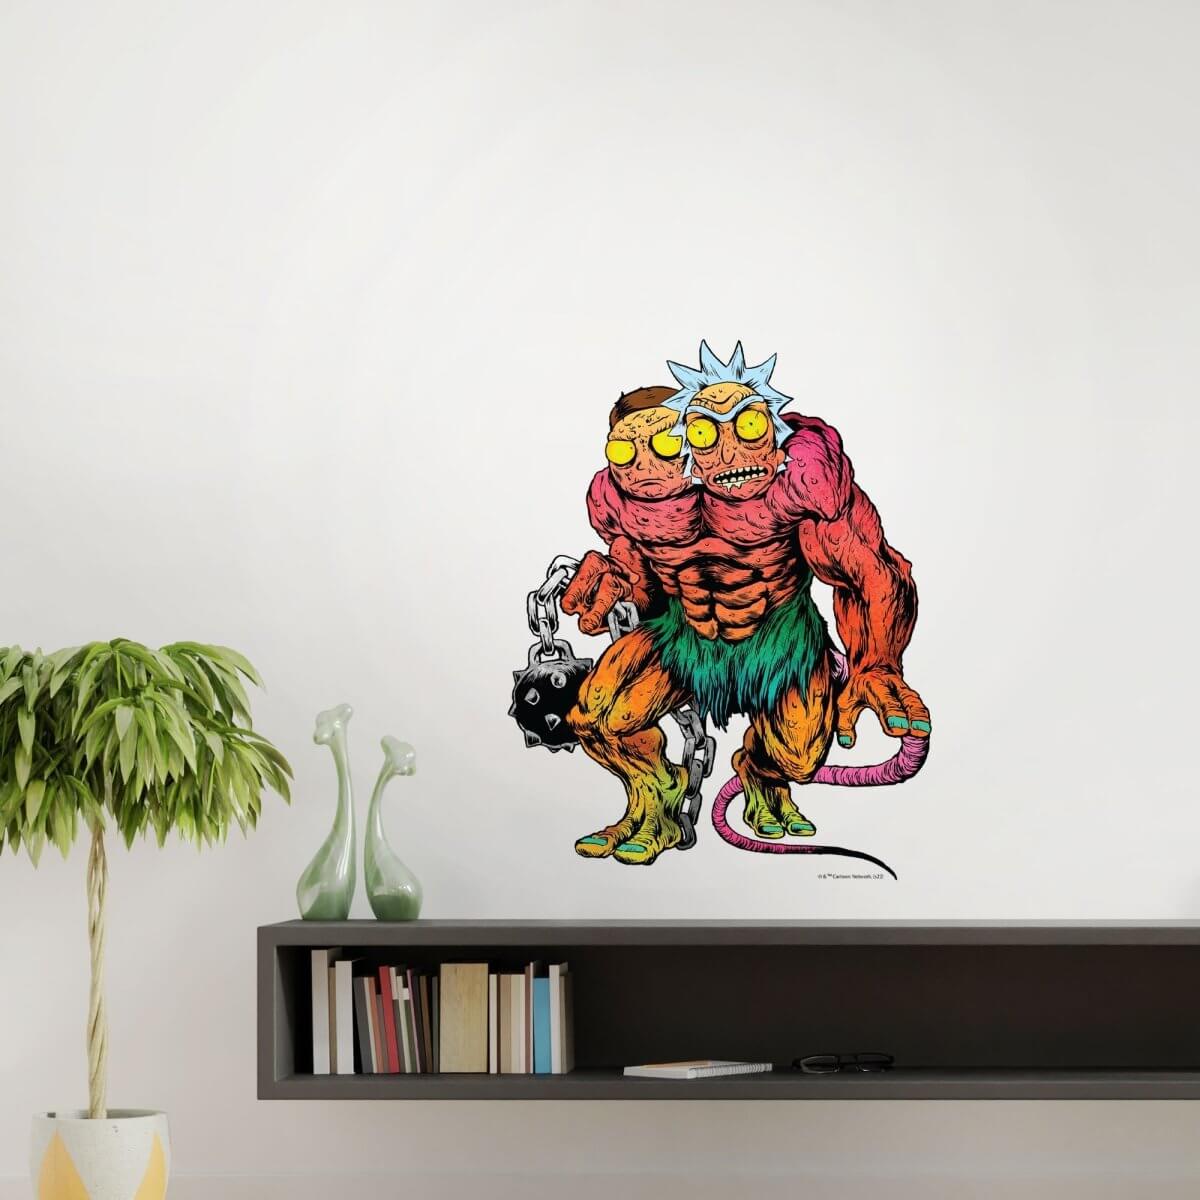 Kismet Decals Rick & Morty Psychedelic Monsters 2 Licensed Wall Sticker - Easy DIY Home & Kids Room Decor Wall Decal Art - Kismet Decals